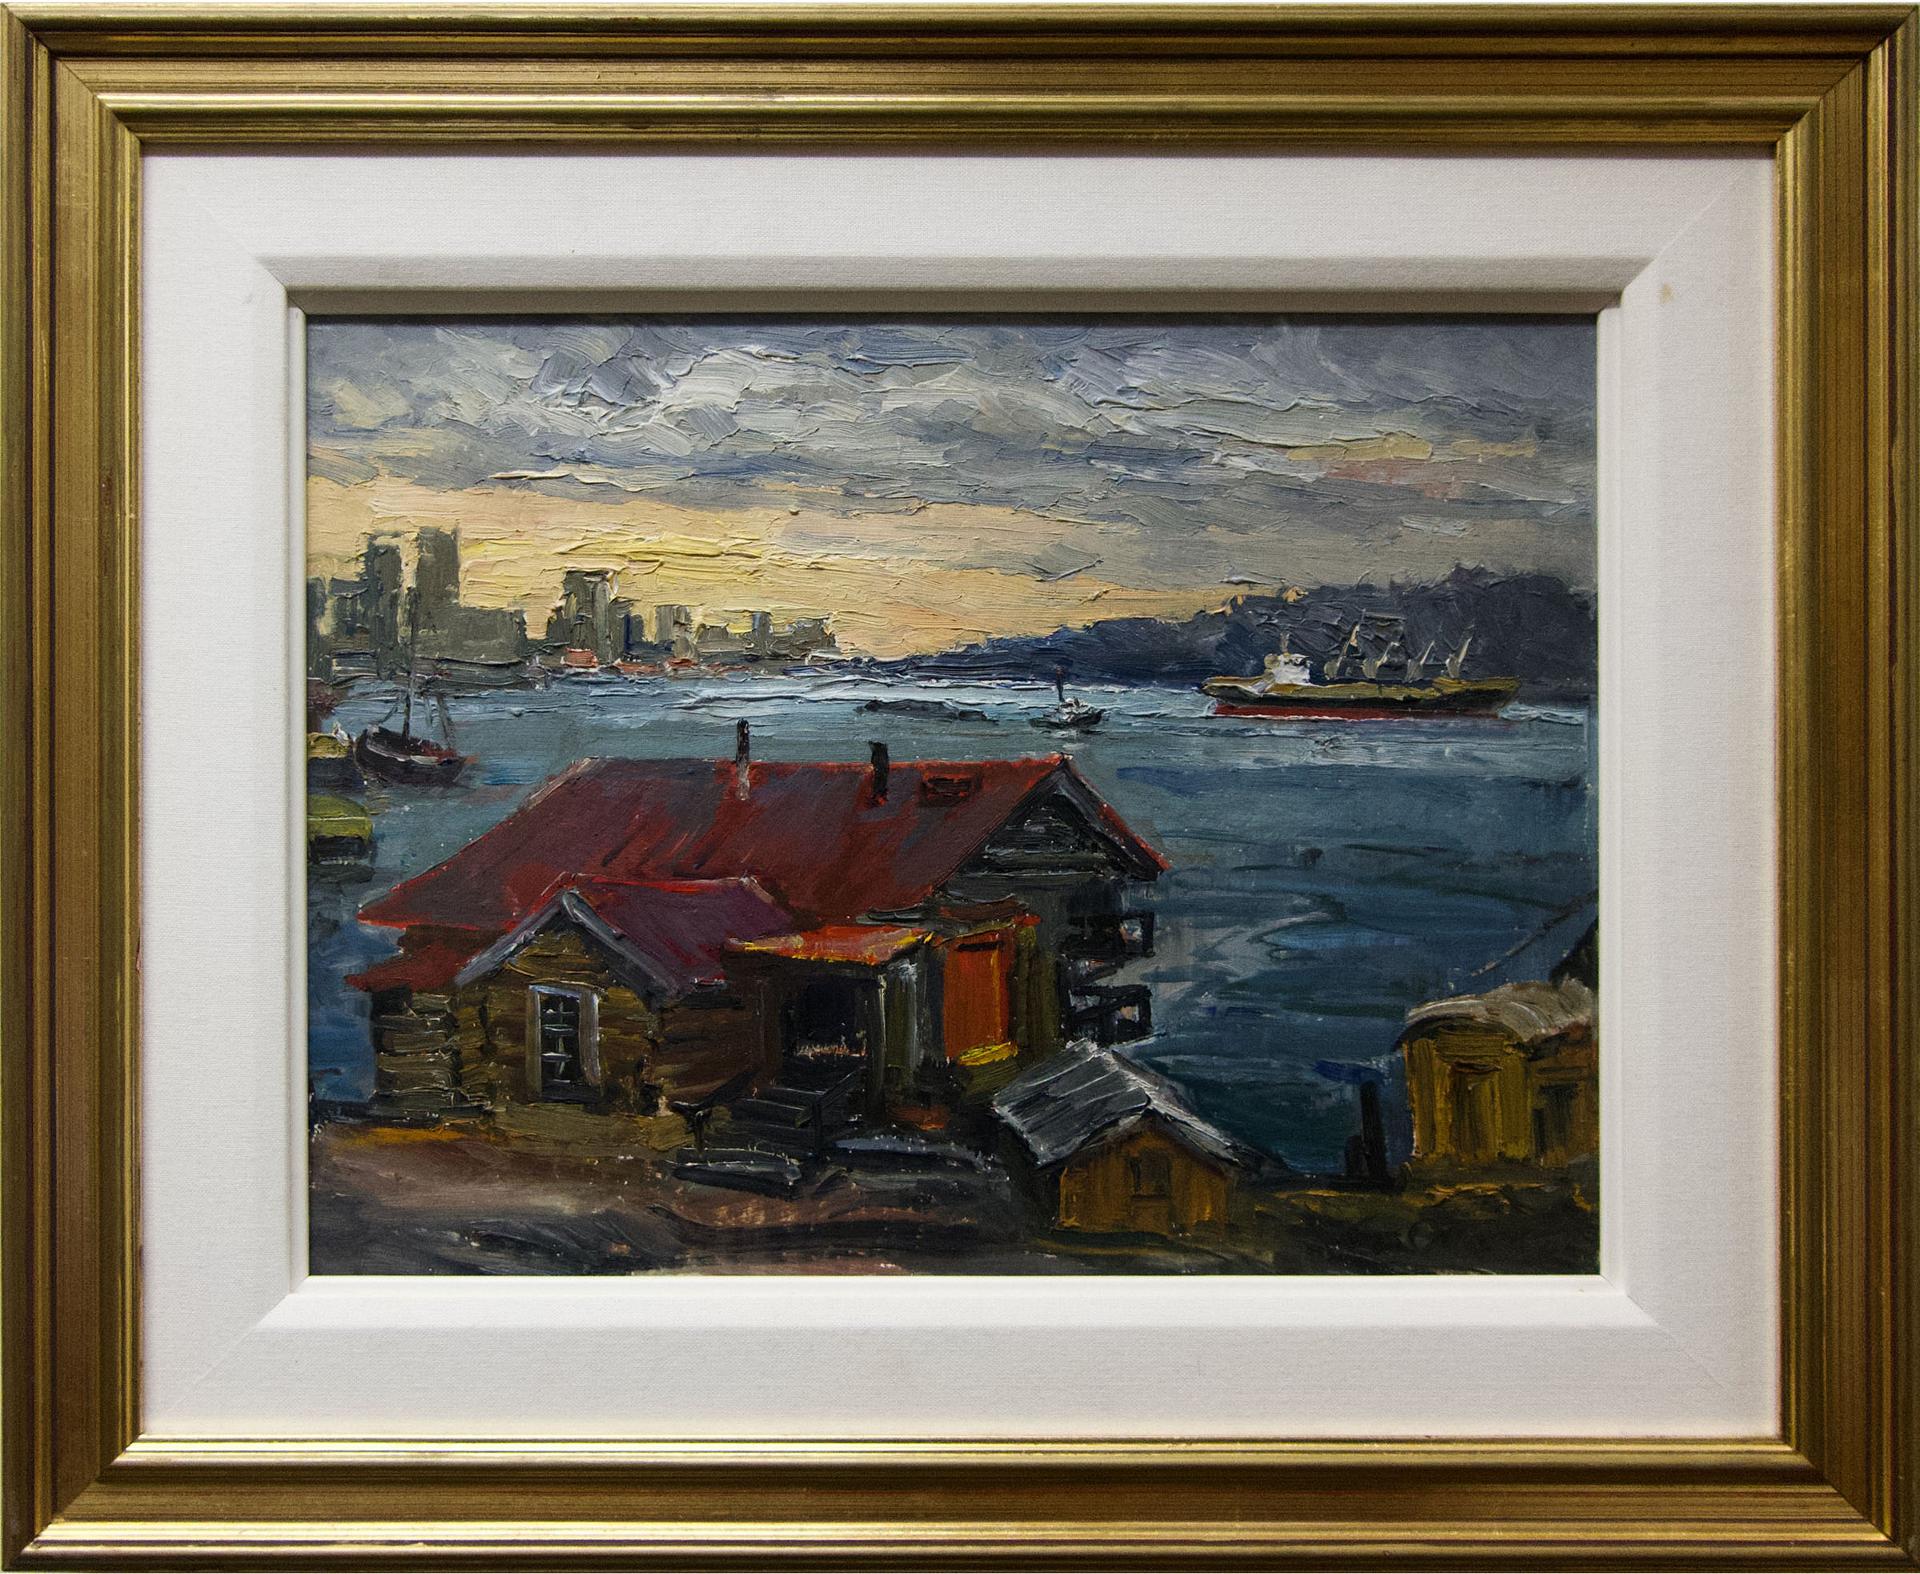 Guttorn Otto (1919-2012) - Vancouver With An Old House